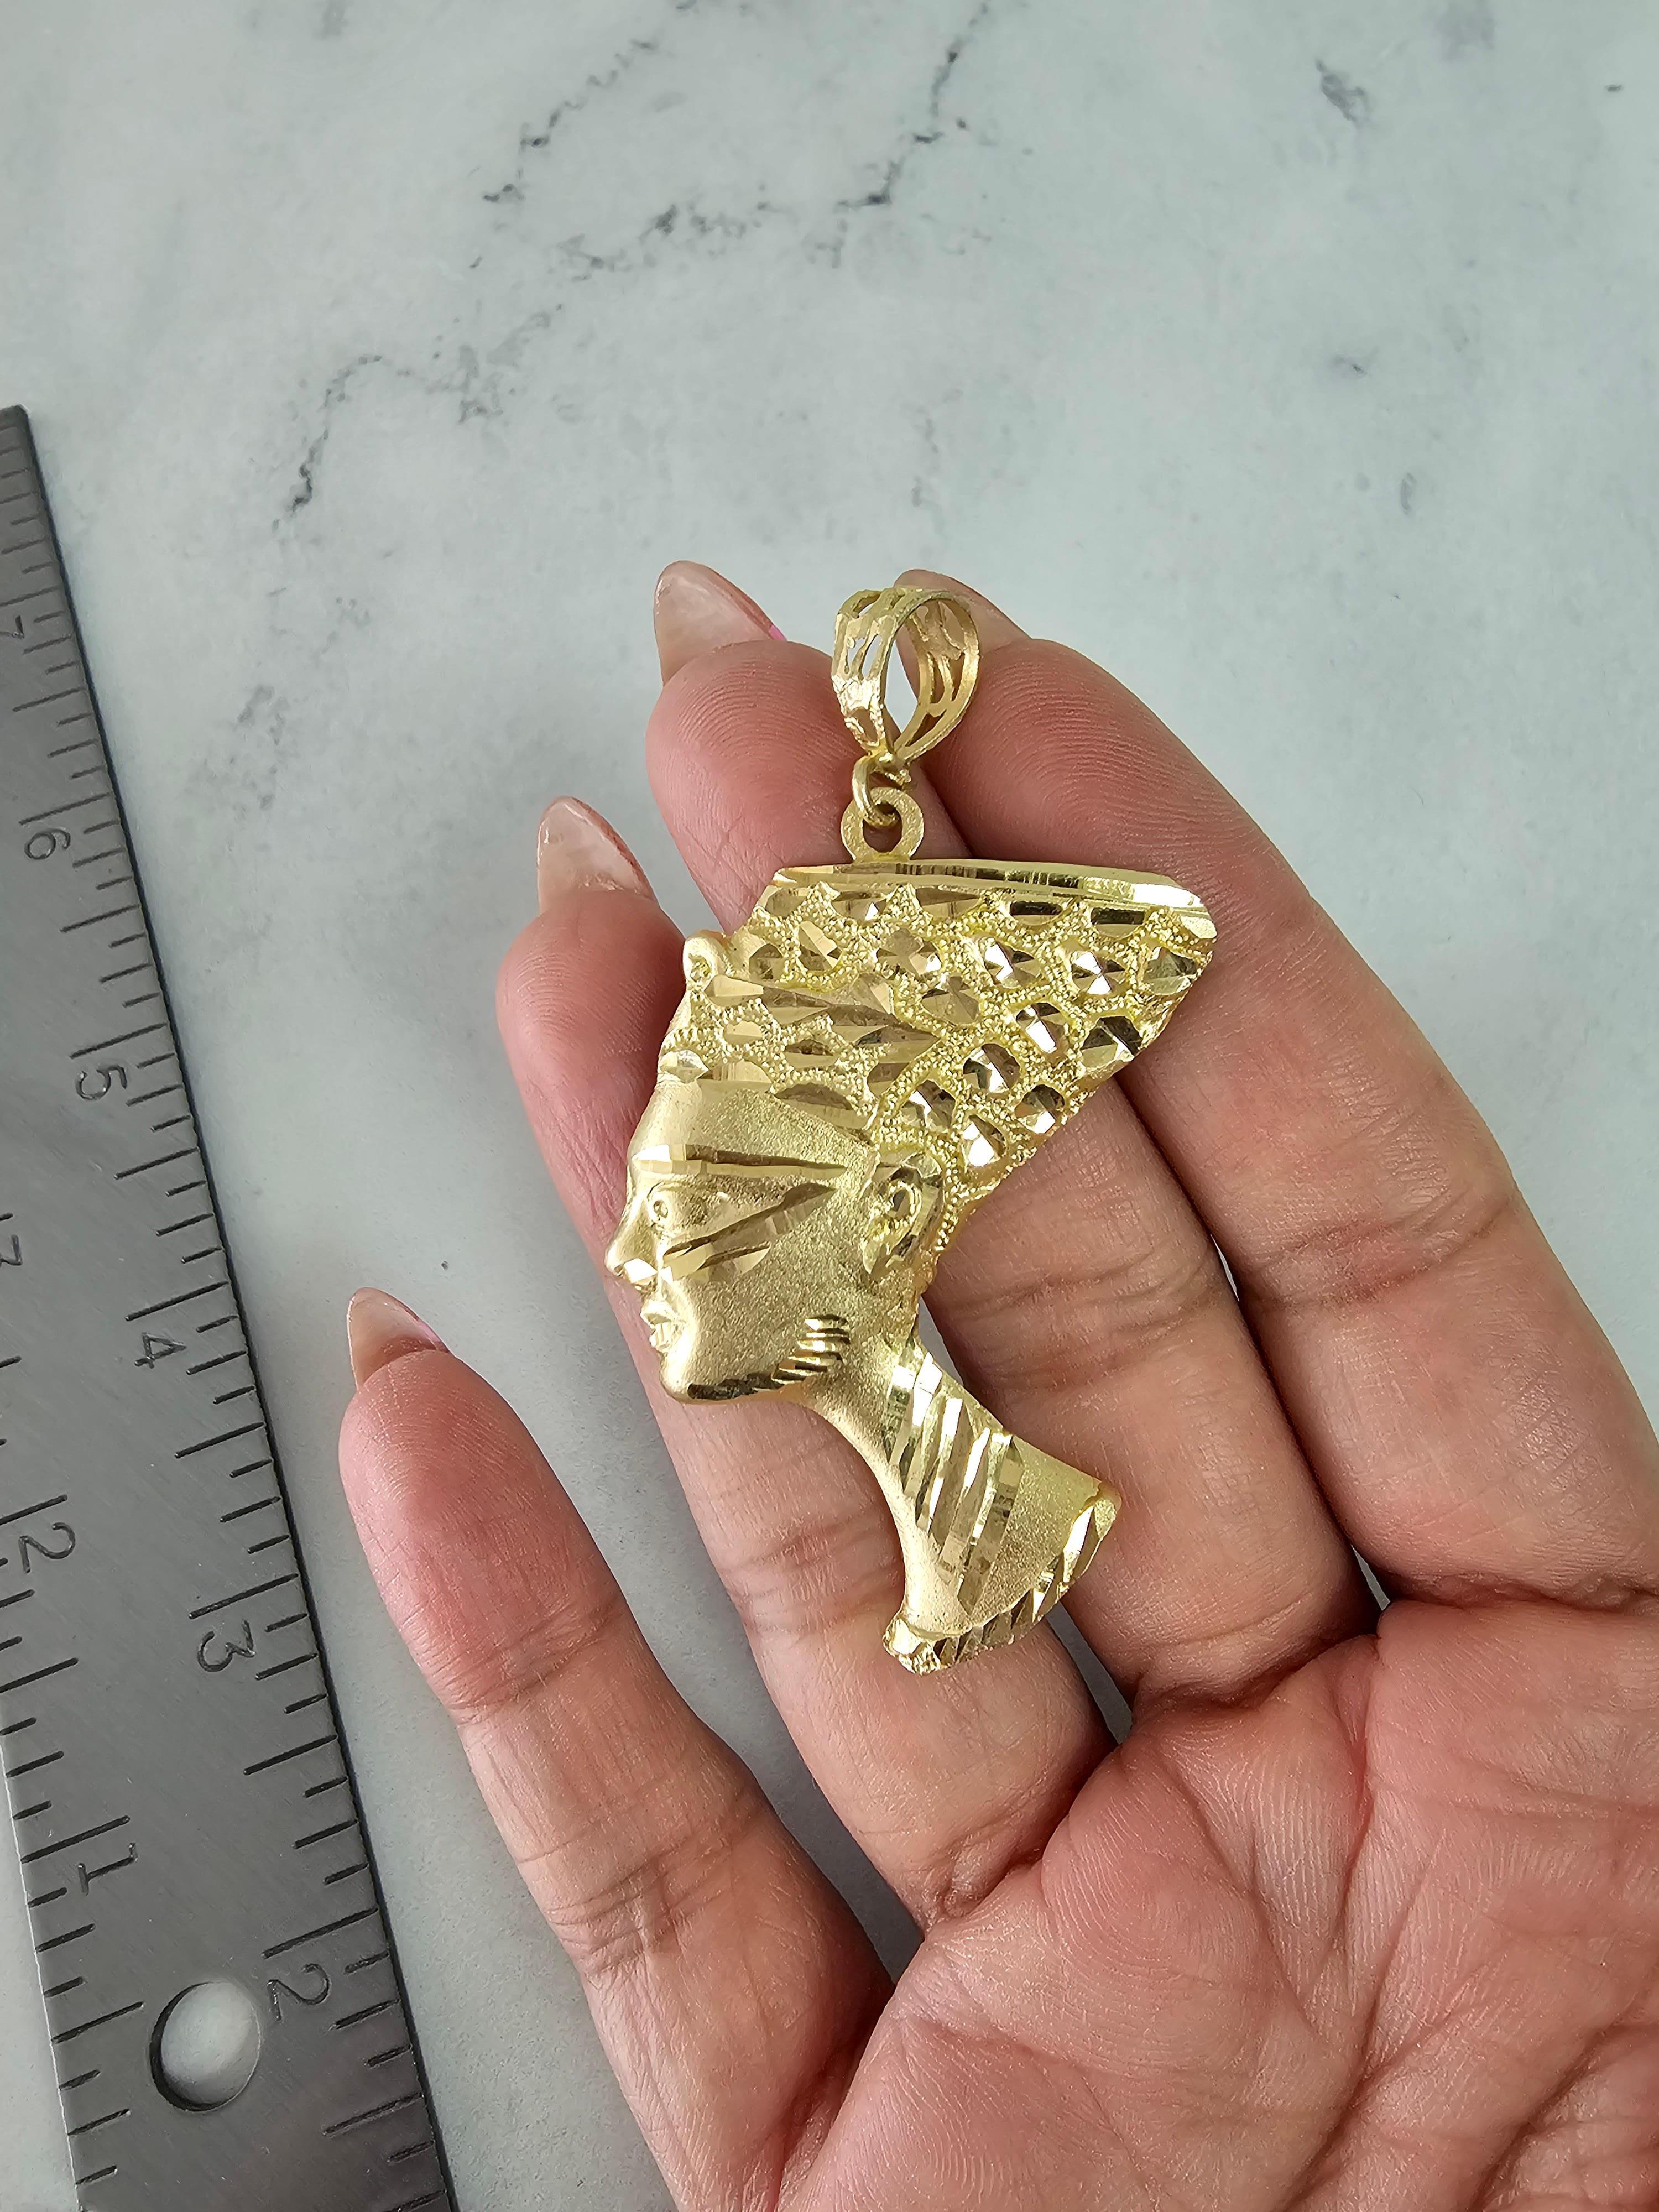 ♥ Product Summary ♥

Metal: 10K Yellow Gold
Dimensions: 60mm x 45mm
Weight: 7 grams
**Can be made in White Gold (Rhodium coated) 
